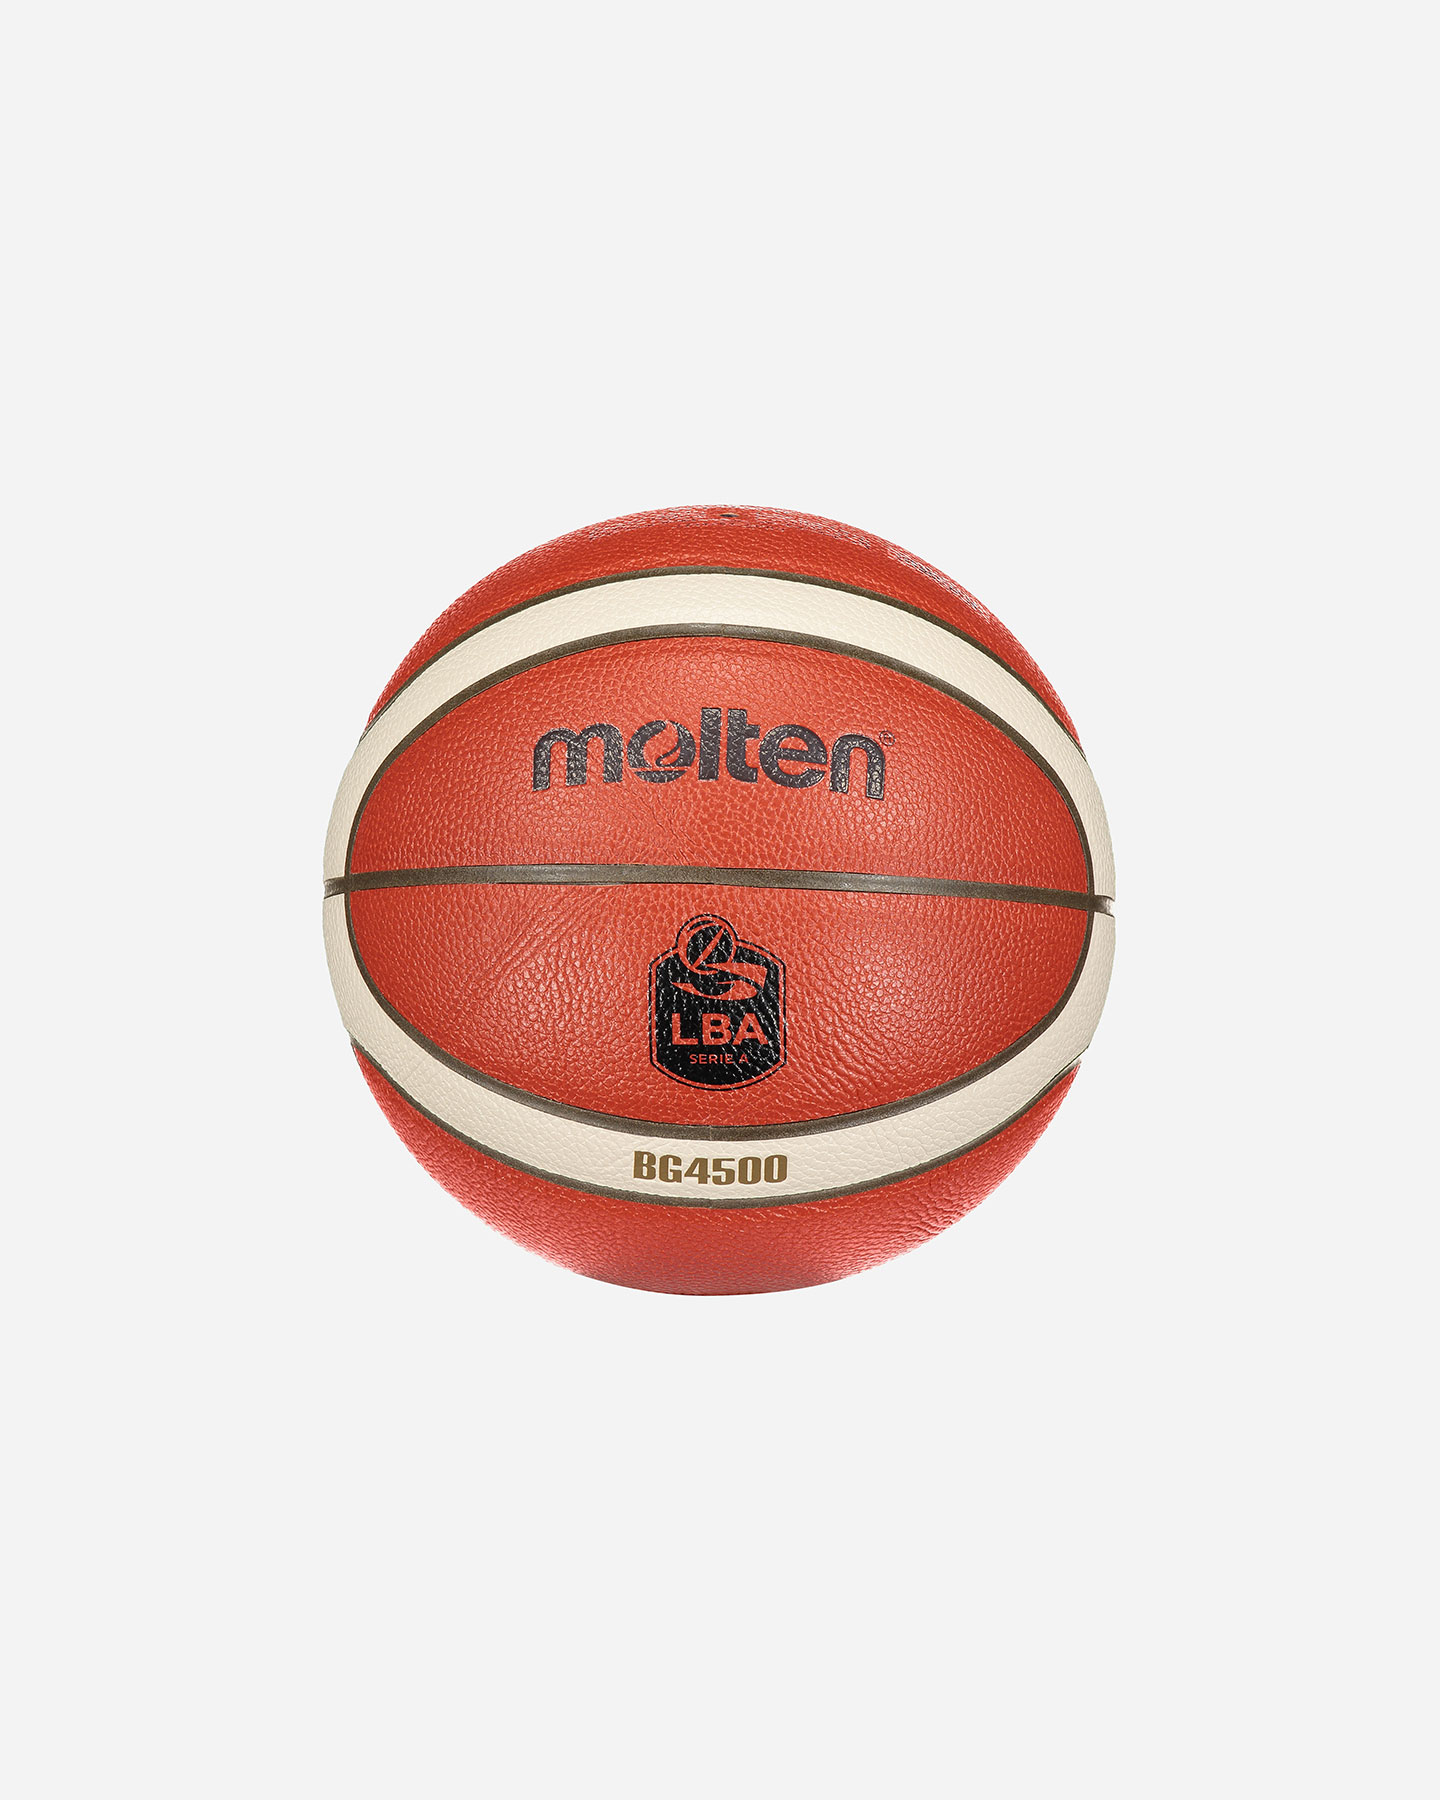 Image of Molten Basket Official 7 - Pallone Basket